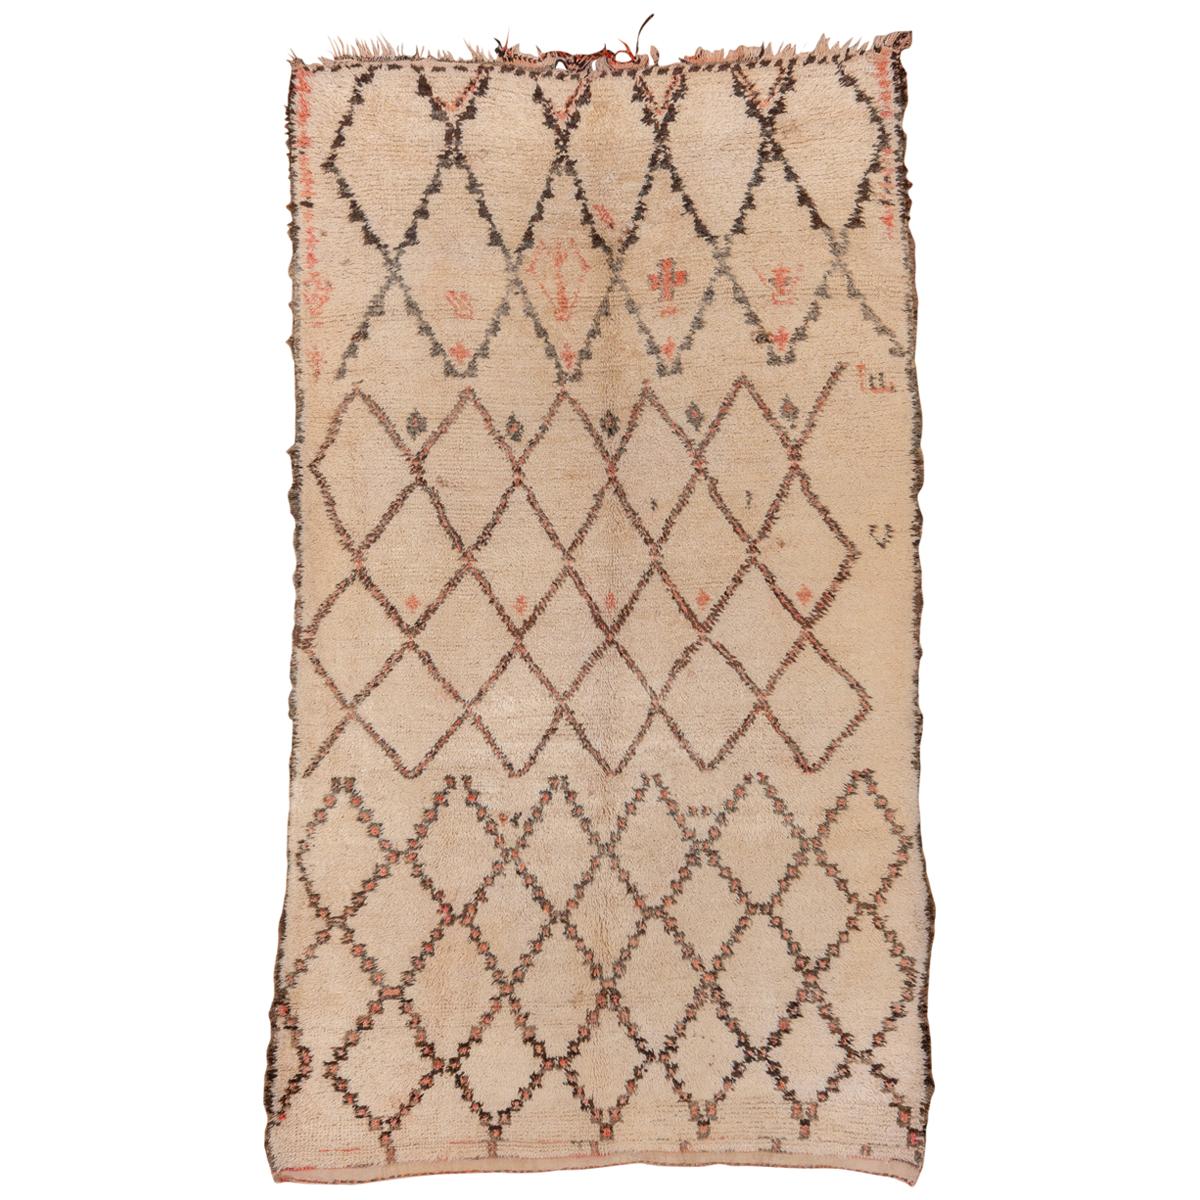 Vintage Moroccan Beni Ourain Rug, Coral and Gray Diamonds For Sale